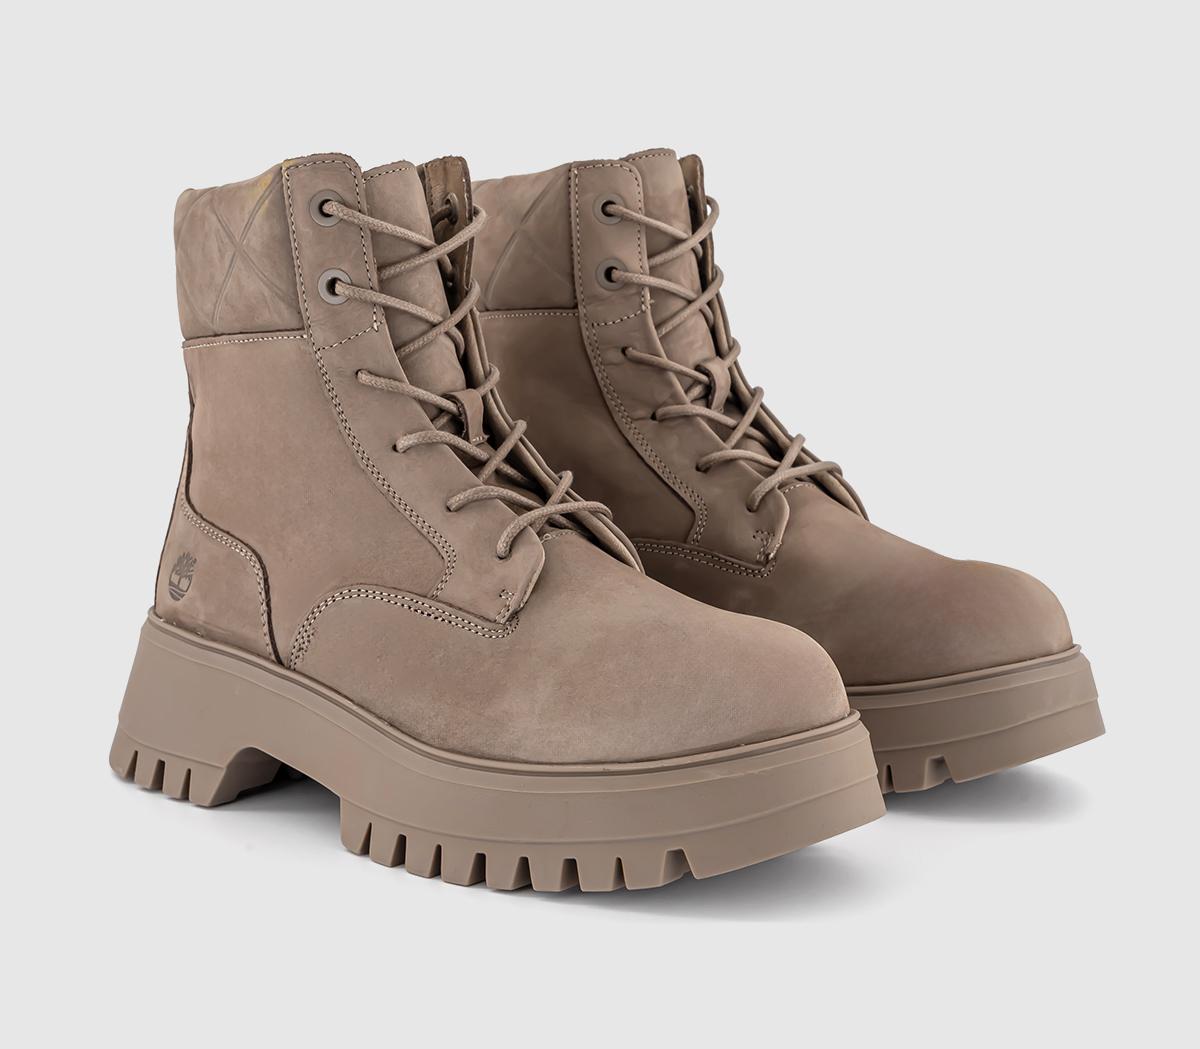 Timberland Tn Lace Up Boots Taupe Grey, 7